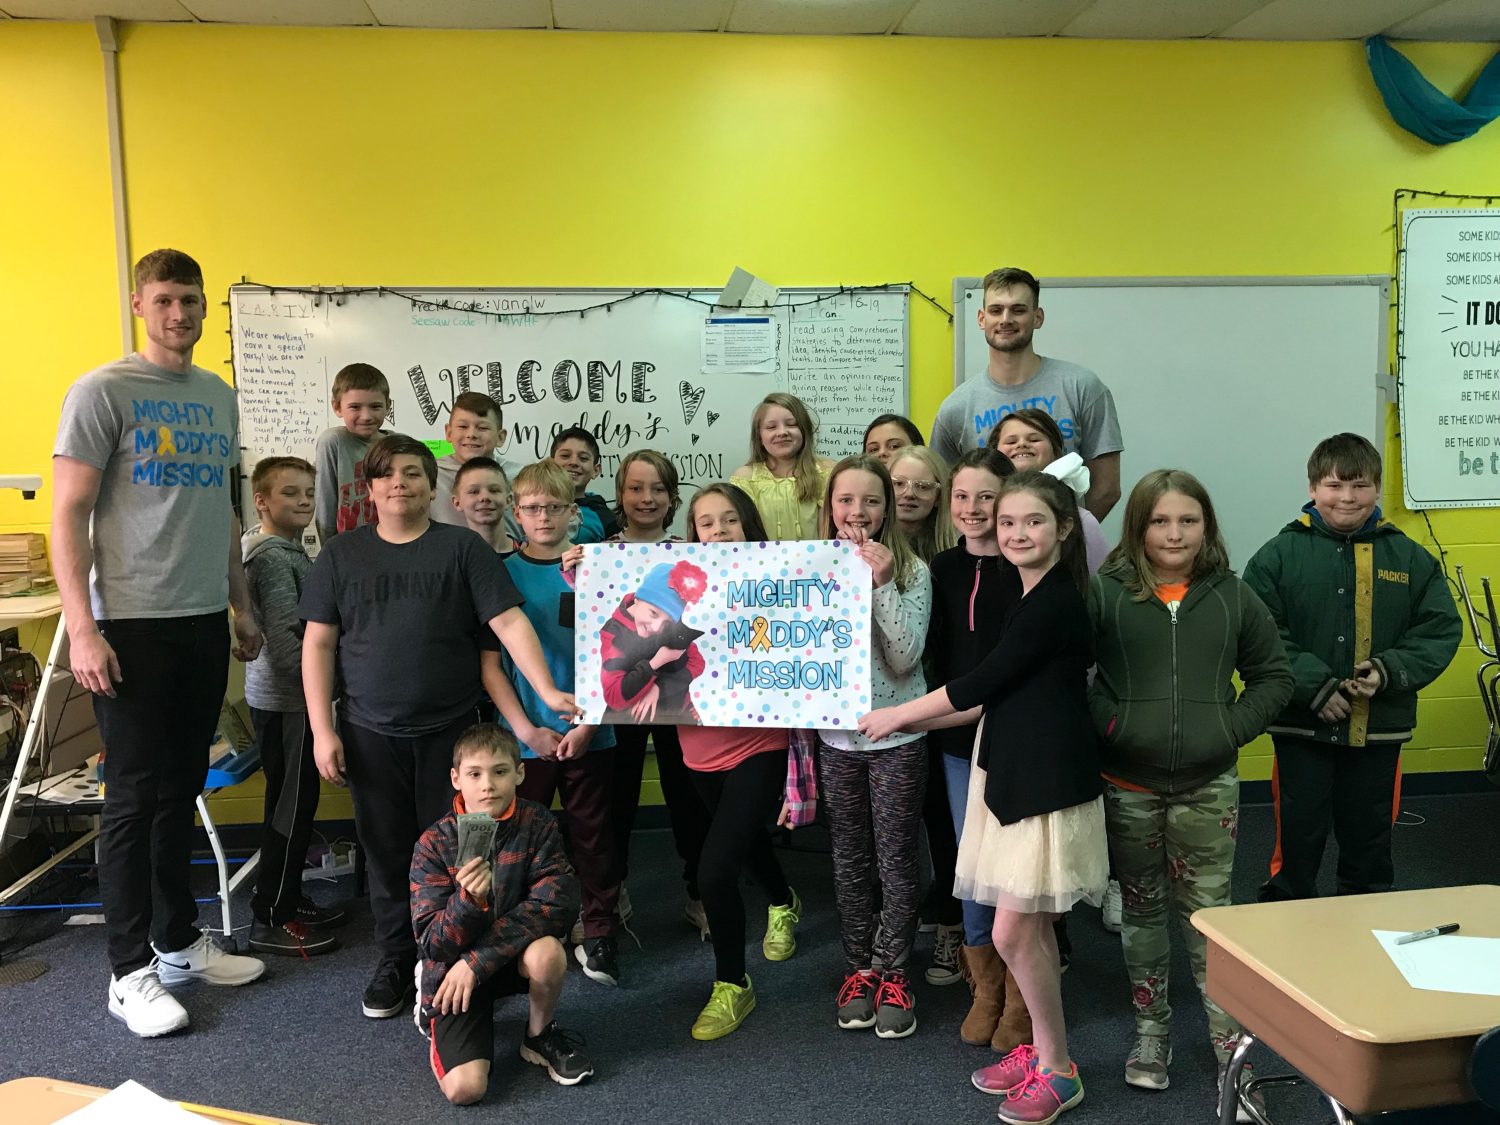 Jefferson fourth graders support Mighty Maddy’s Mission